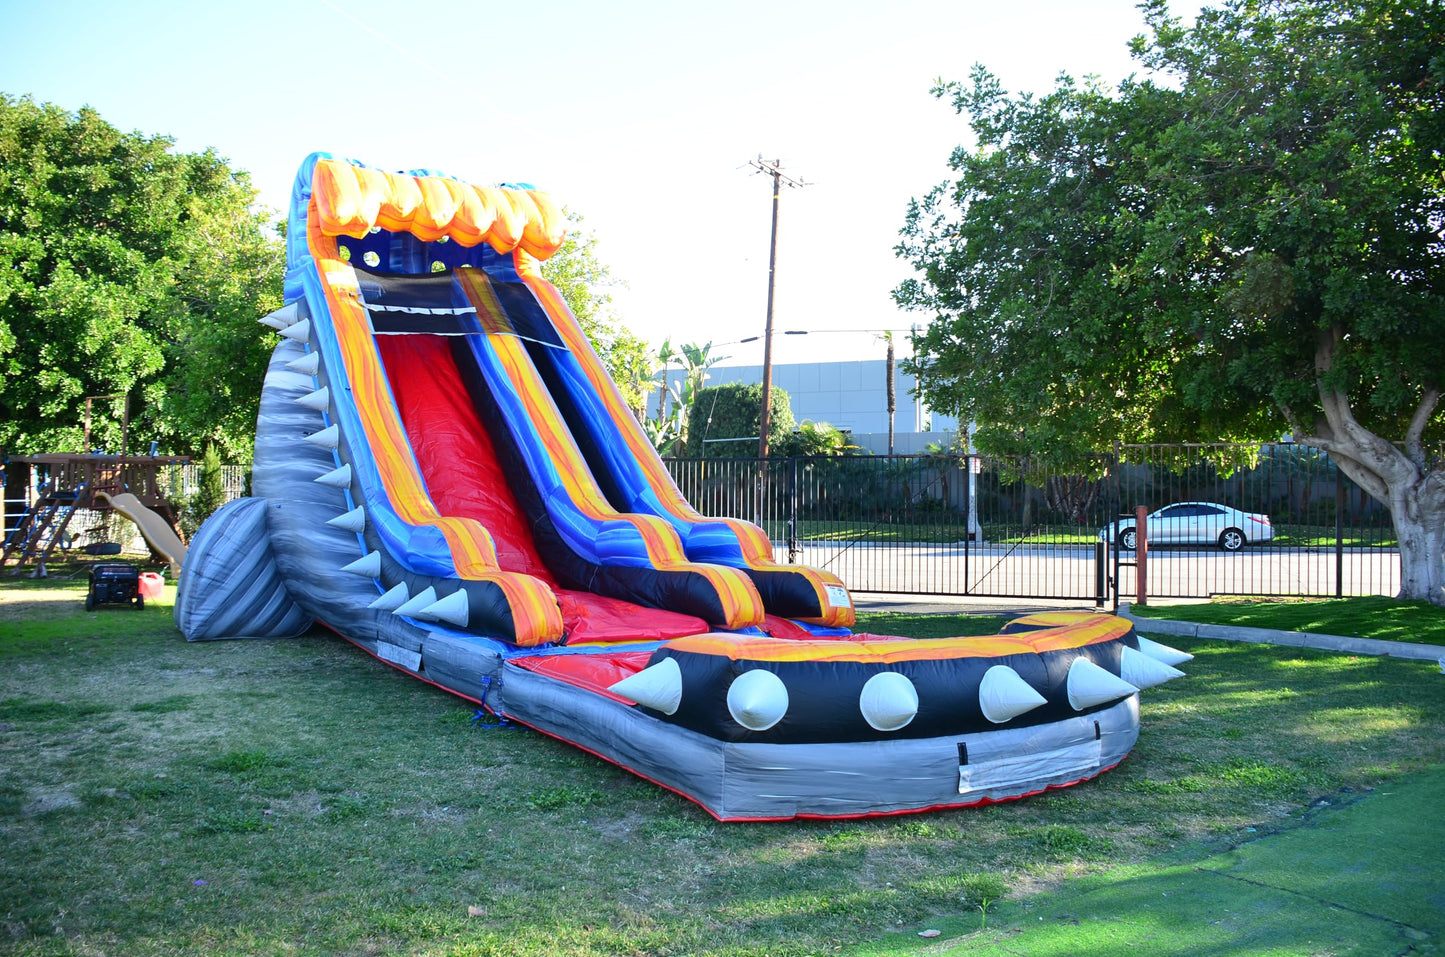 JumpOrange 19’ Rocker Commercial Grade Water Slide with Detachable Deep Pool, Big Kids and Adults, Tall Blow Up Waterslide, Outdoor Indoor Inflatable, Wet Dry Use, Summer (with Blower)